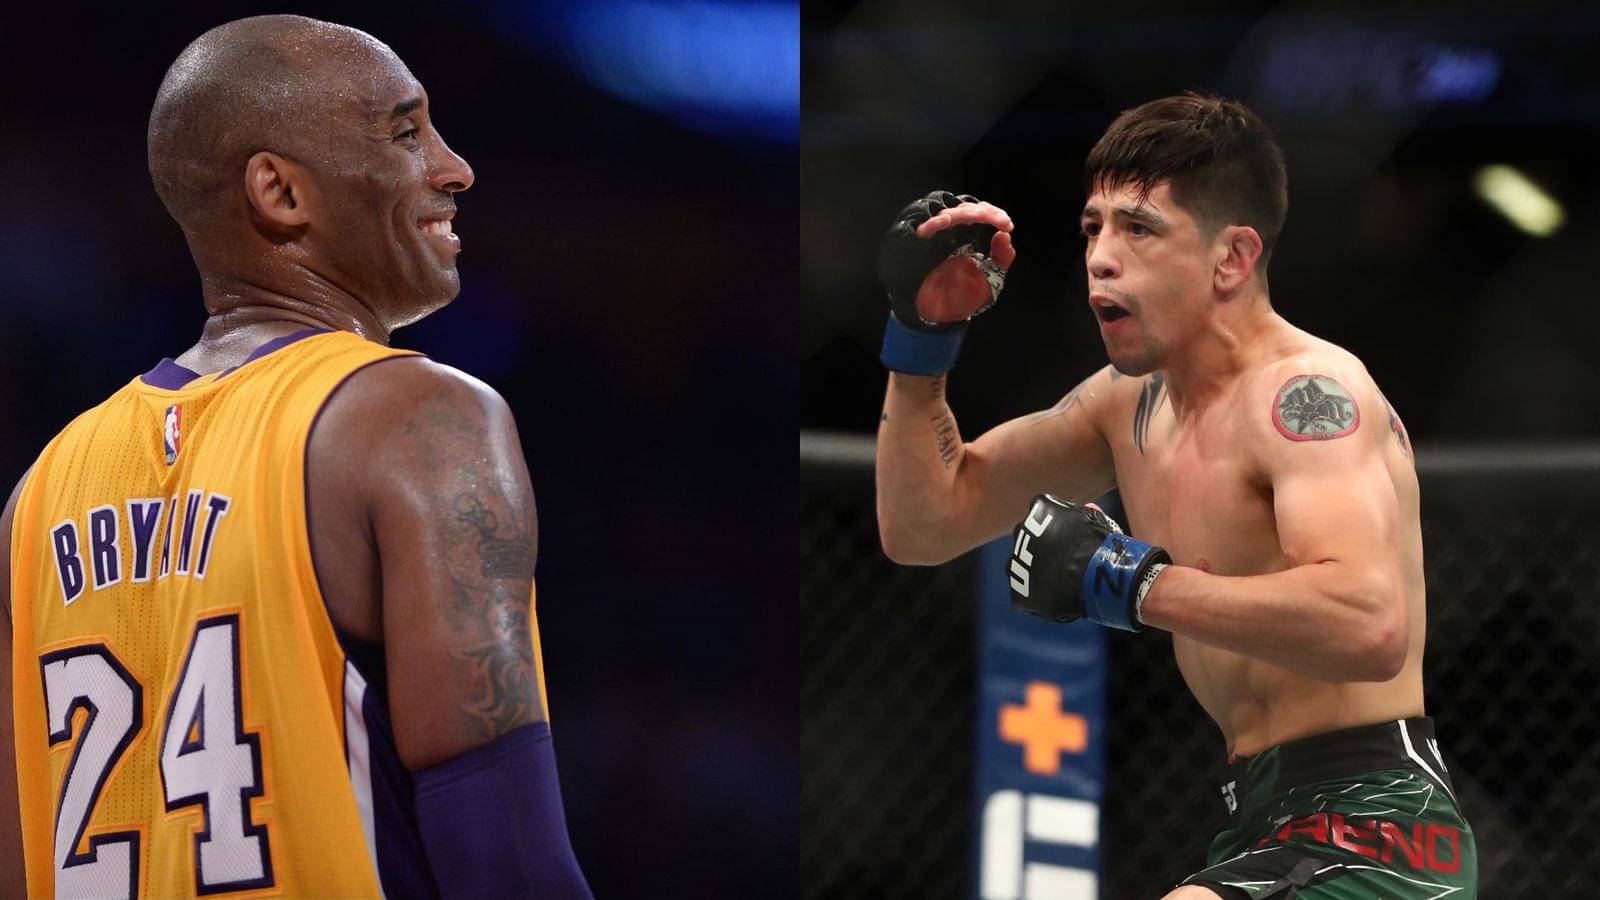 Brandon Moreno Channels Kobe Bryant Energy Ahead of Fourth Clash With Deiveson Figueiredo at UFC 283 in Brazil